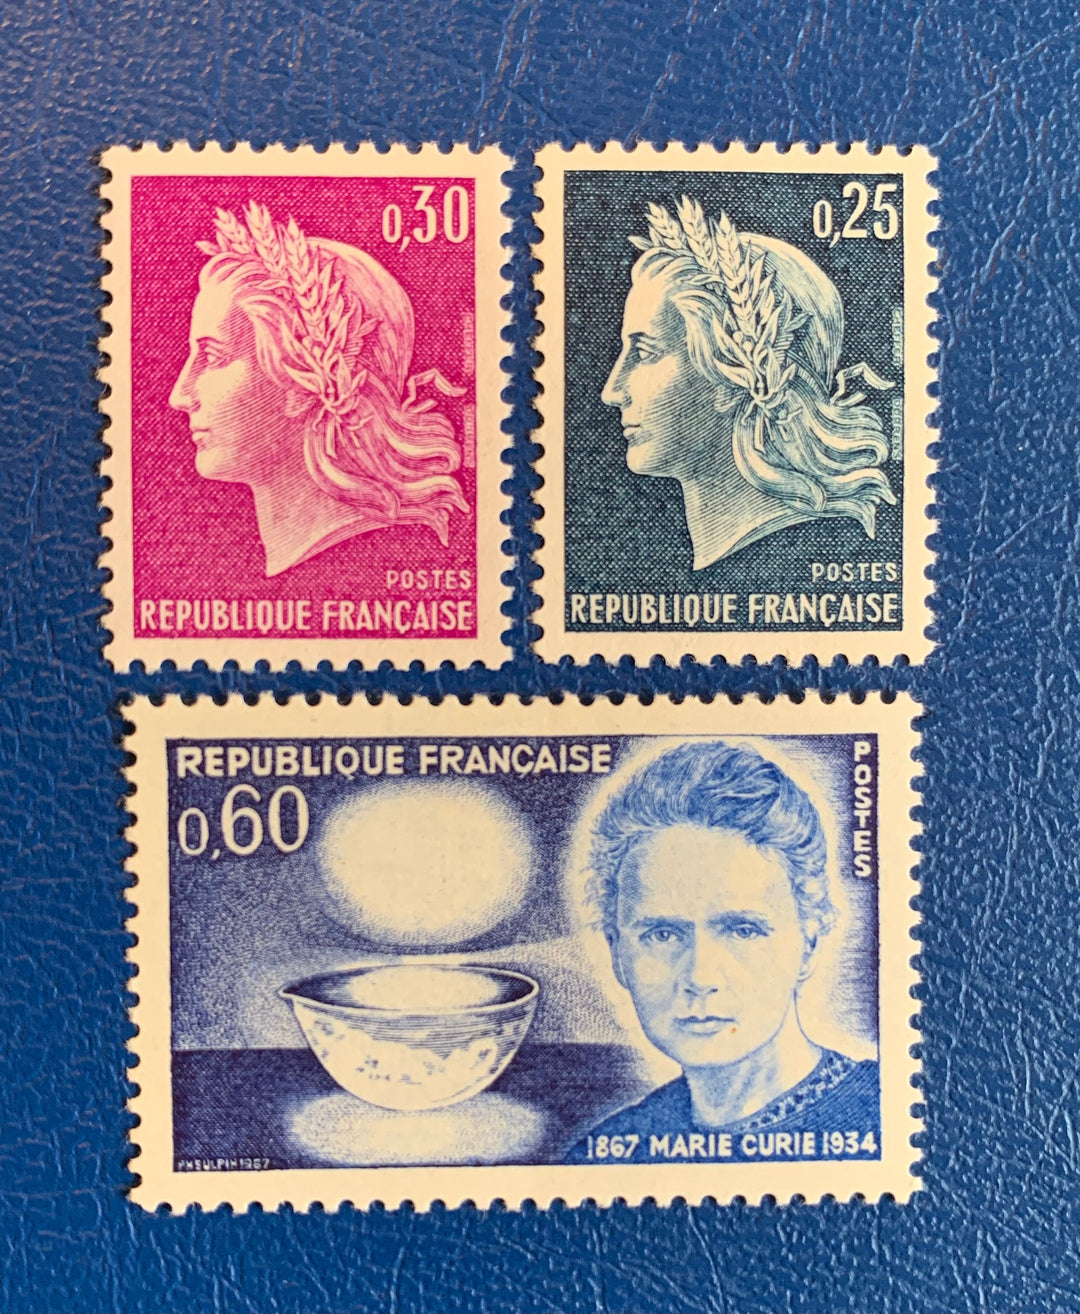 France - Original Vintage Postage Stamps- 1967 - Marianne & Madame Curry - for the collector, artist or crafter